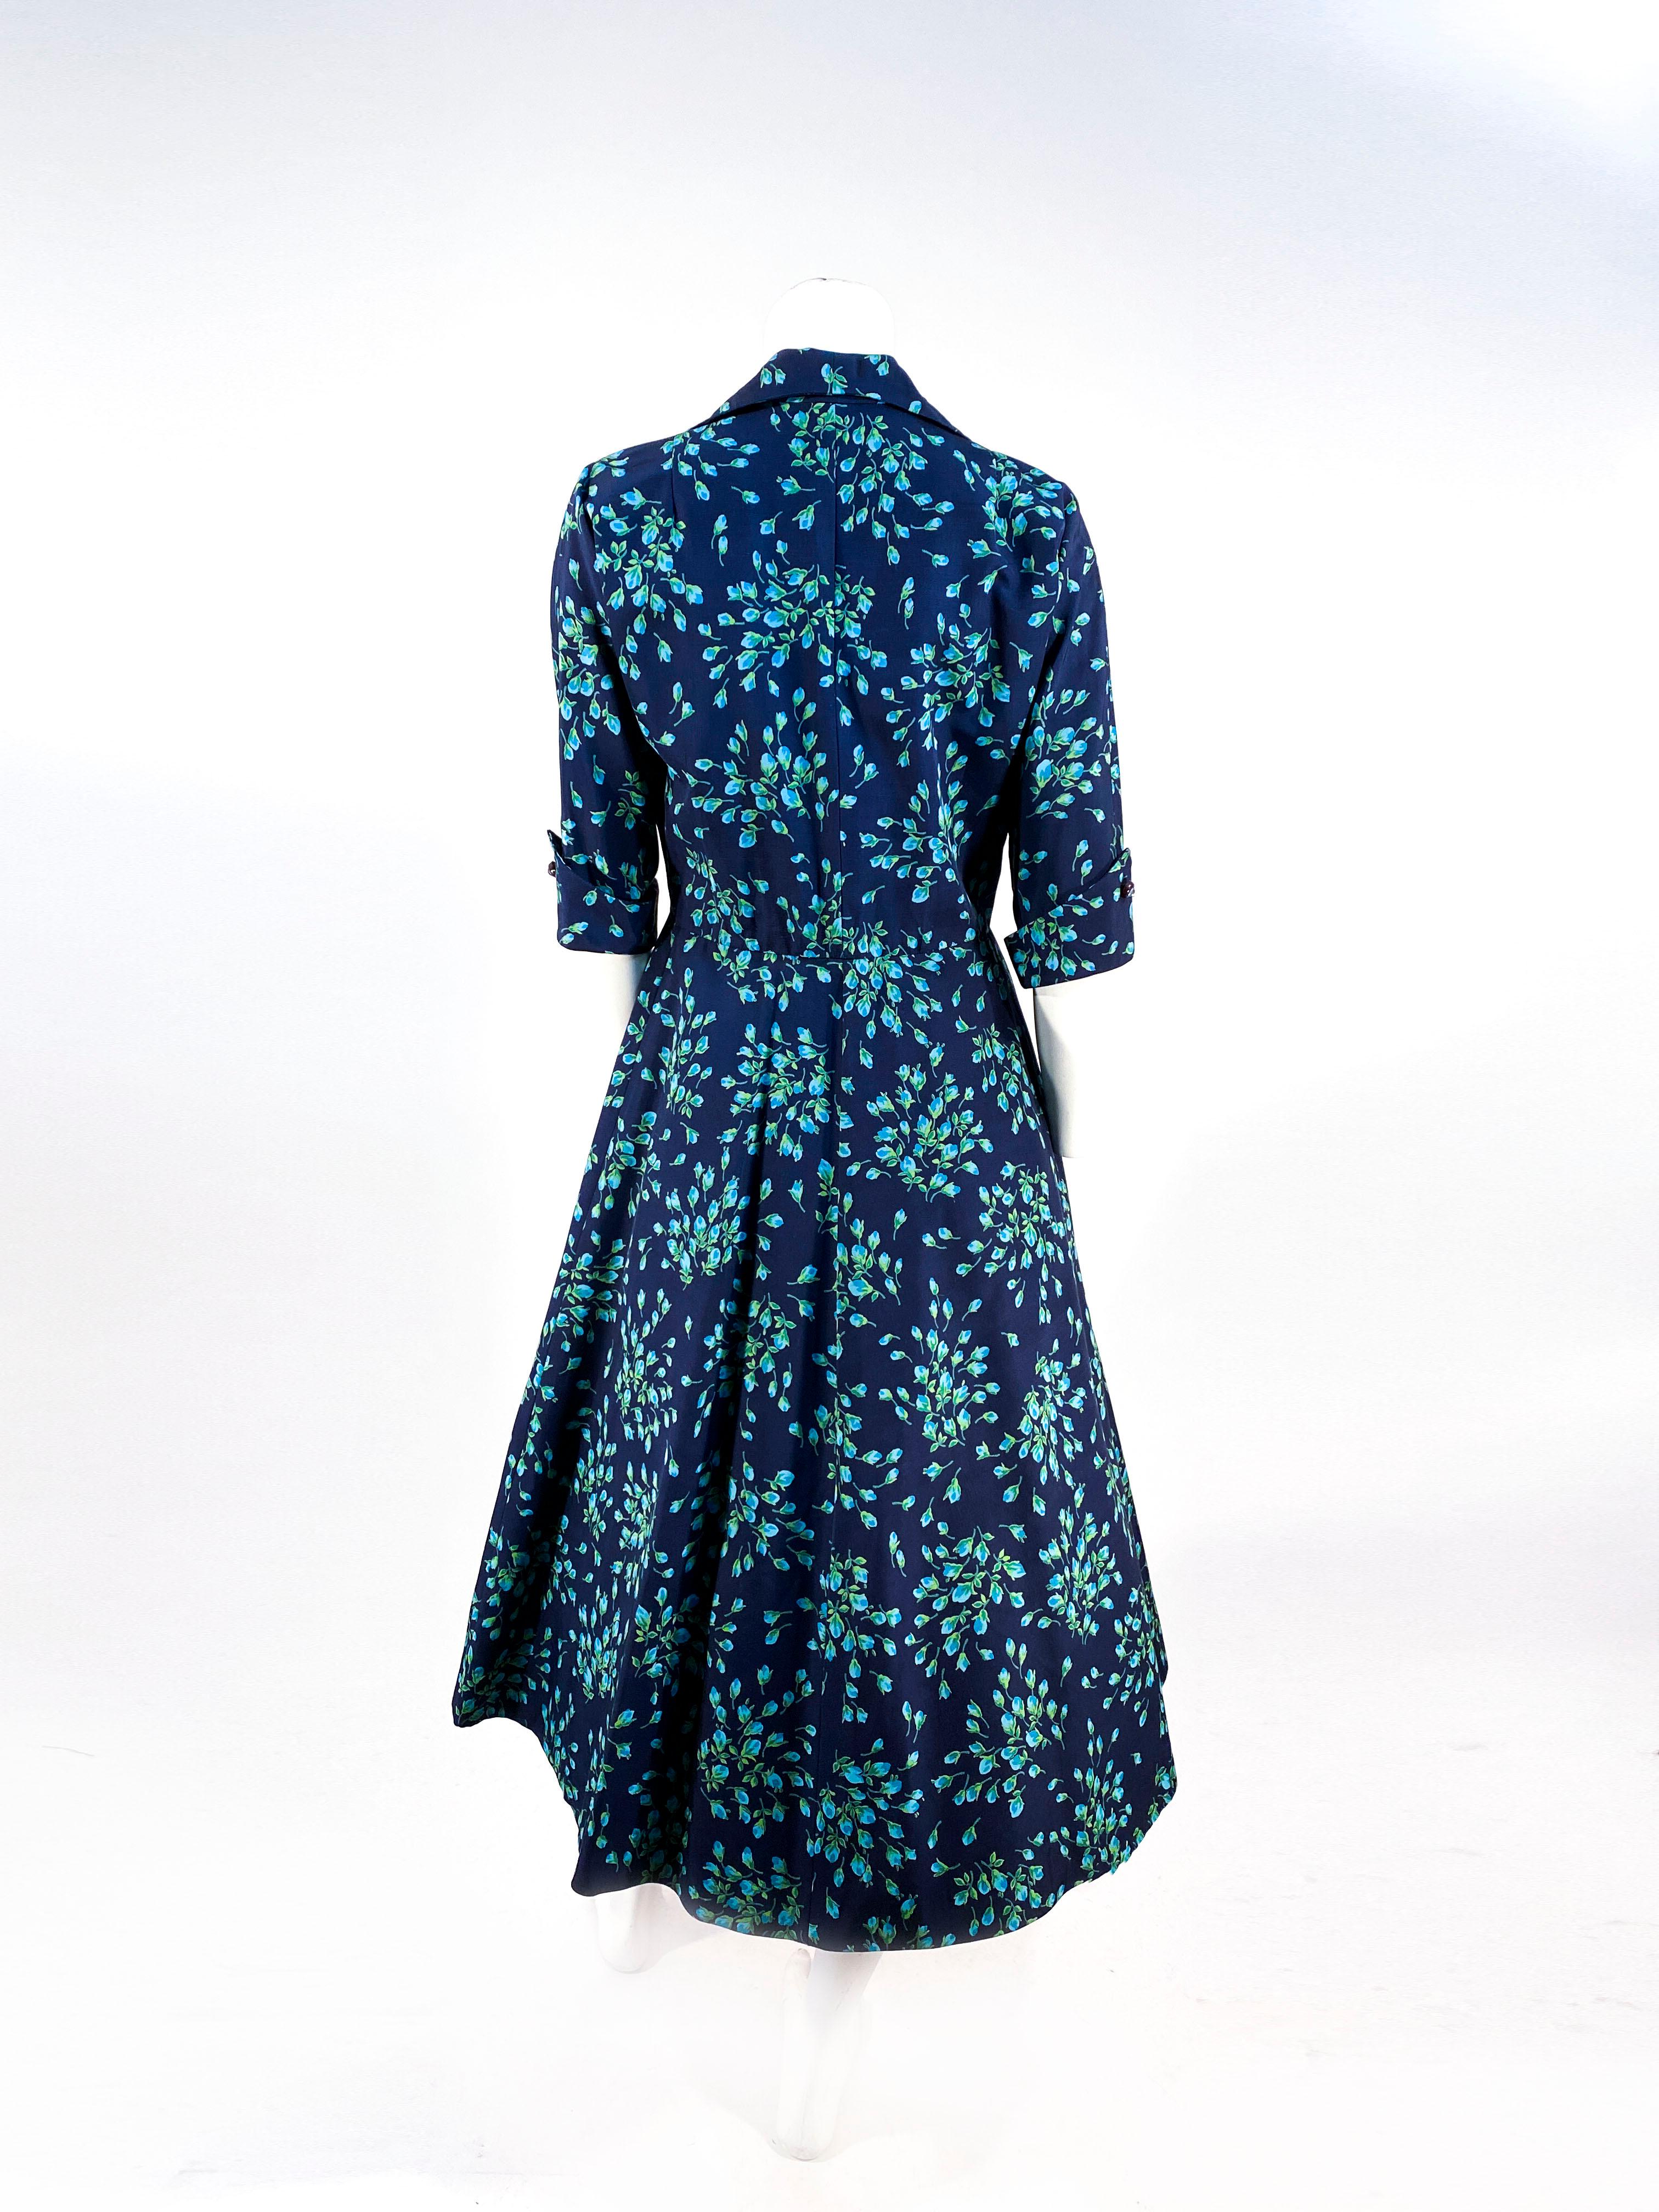 1950s Navy Blue Floral Printed Dress For Sale 2